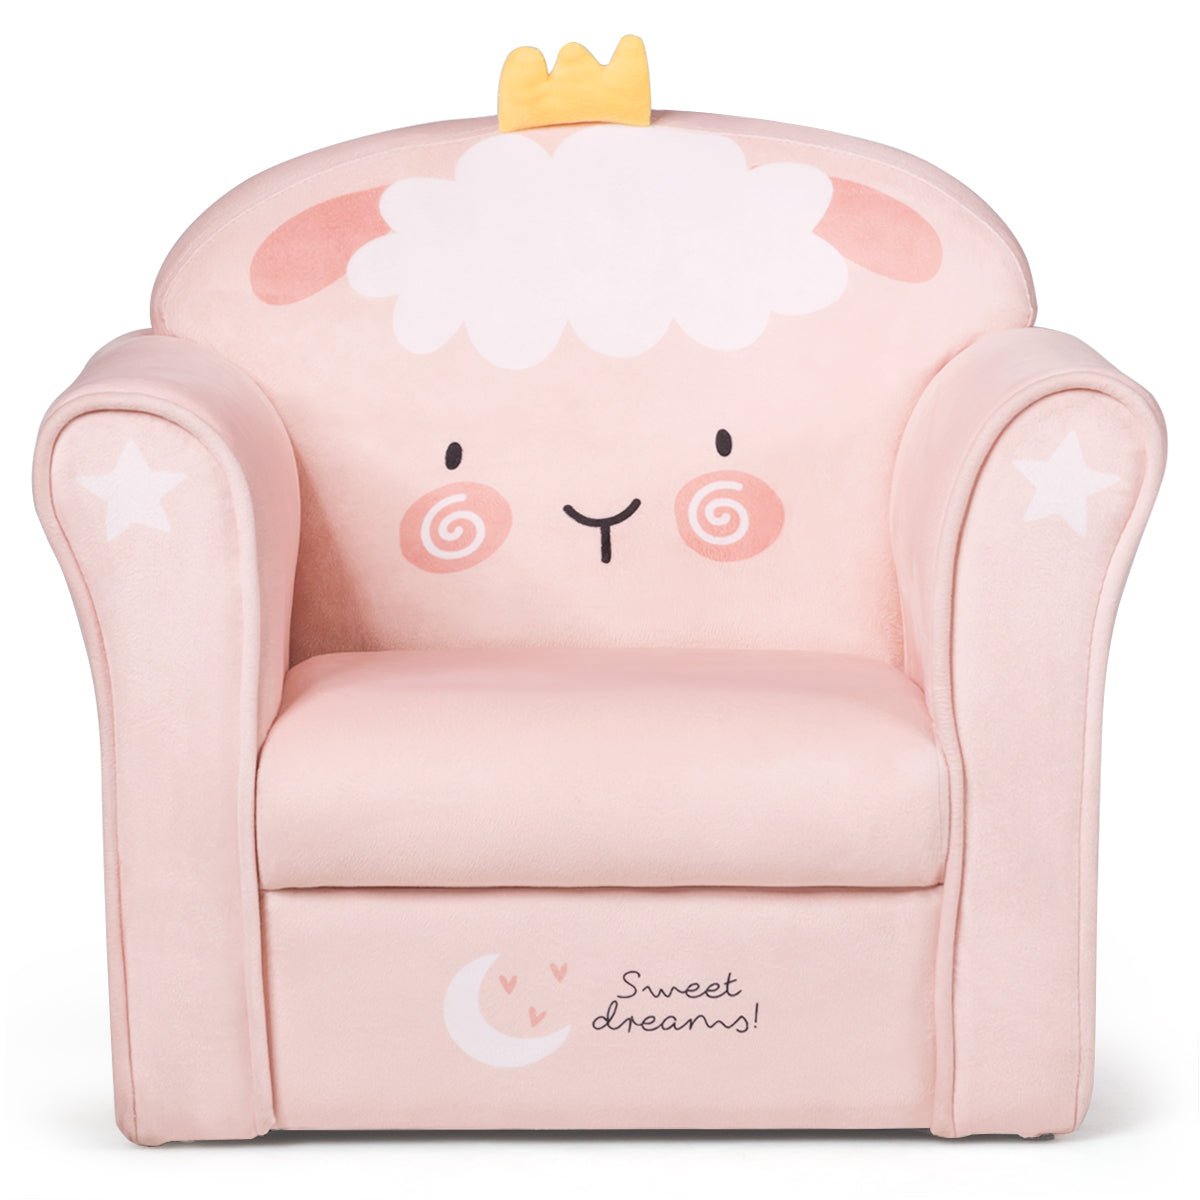 Children's Sofa with Adorable Lamb Design: Enhance Bedroom Comfort and Style